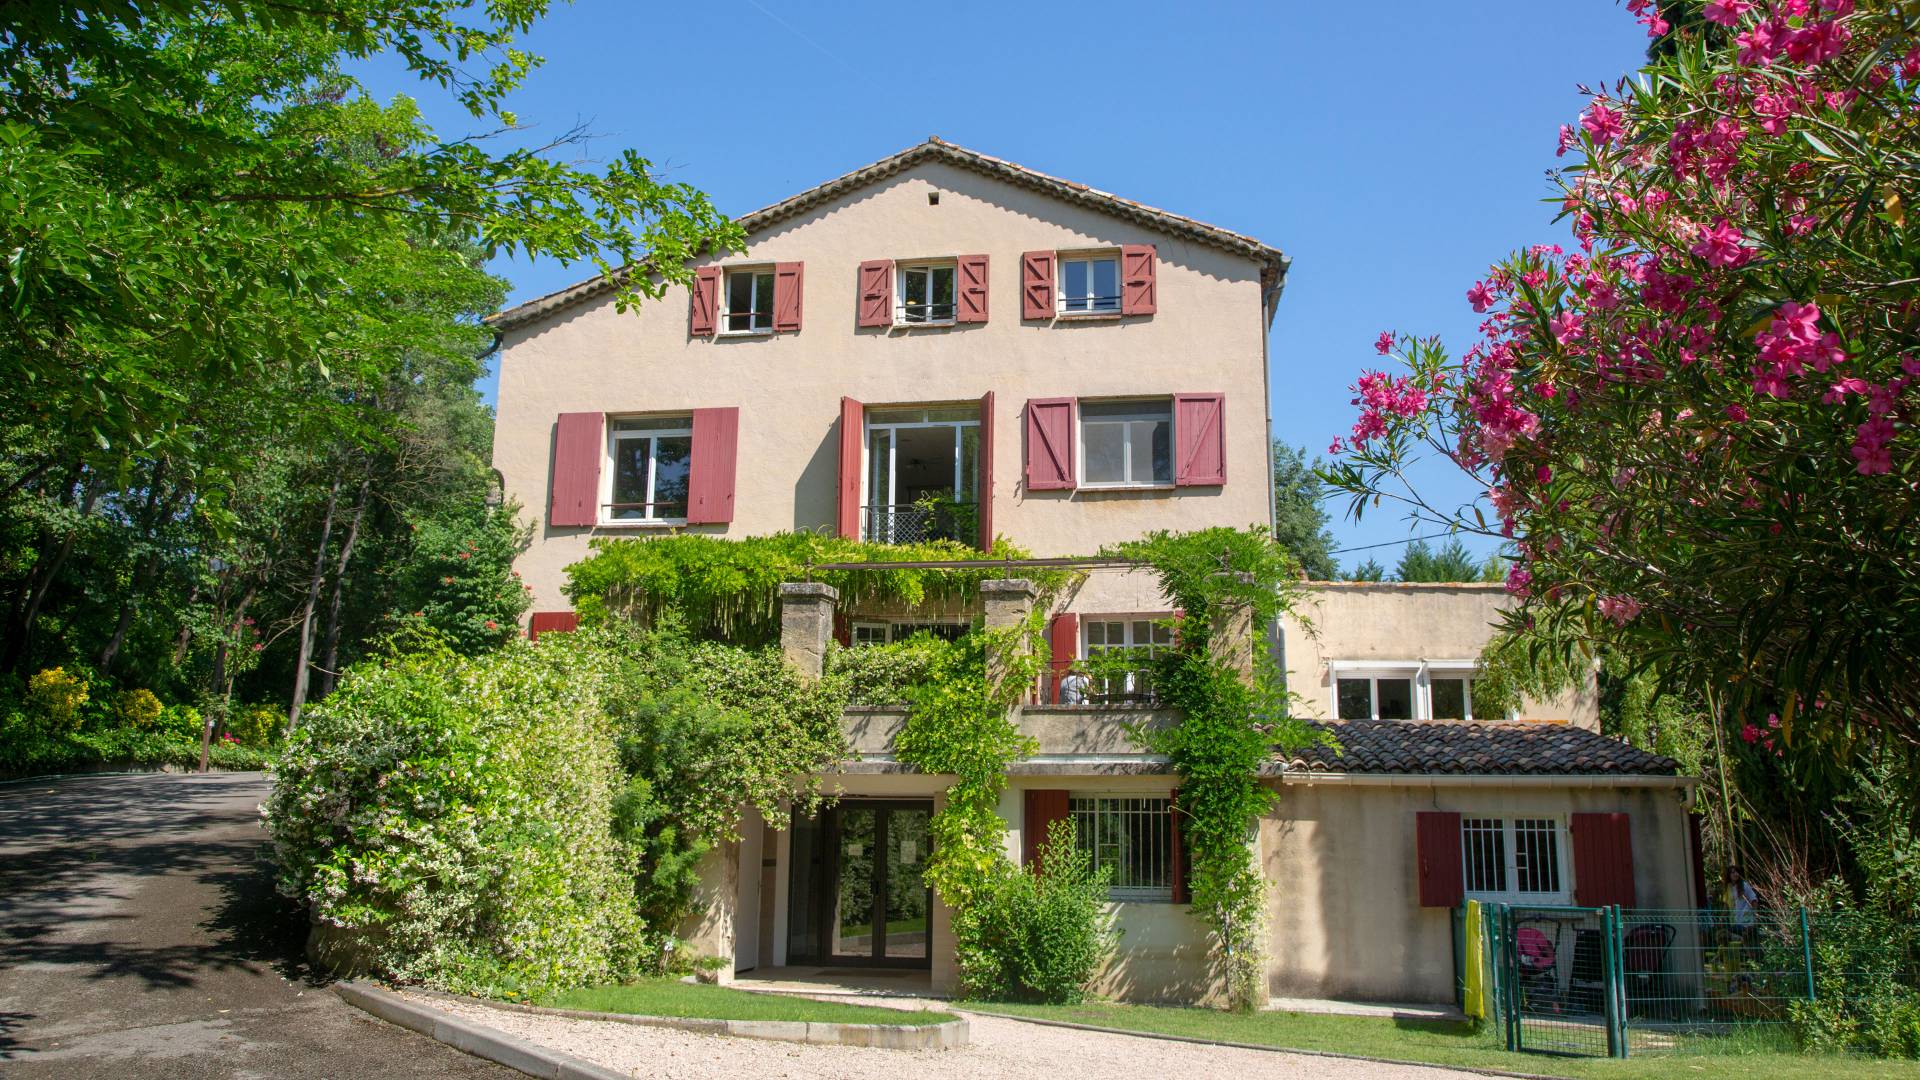 Grounds and house at Aix-en-Provence language institute in France